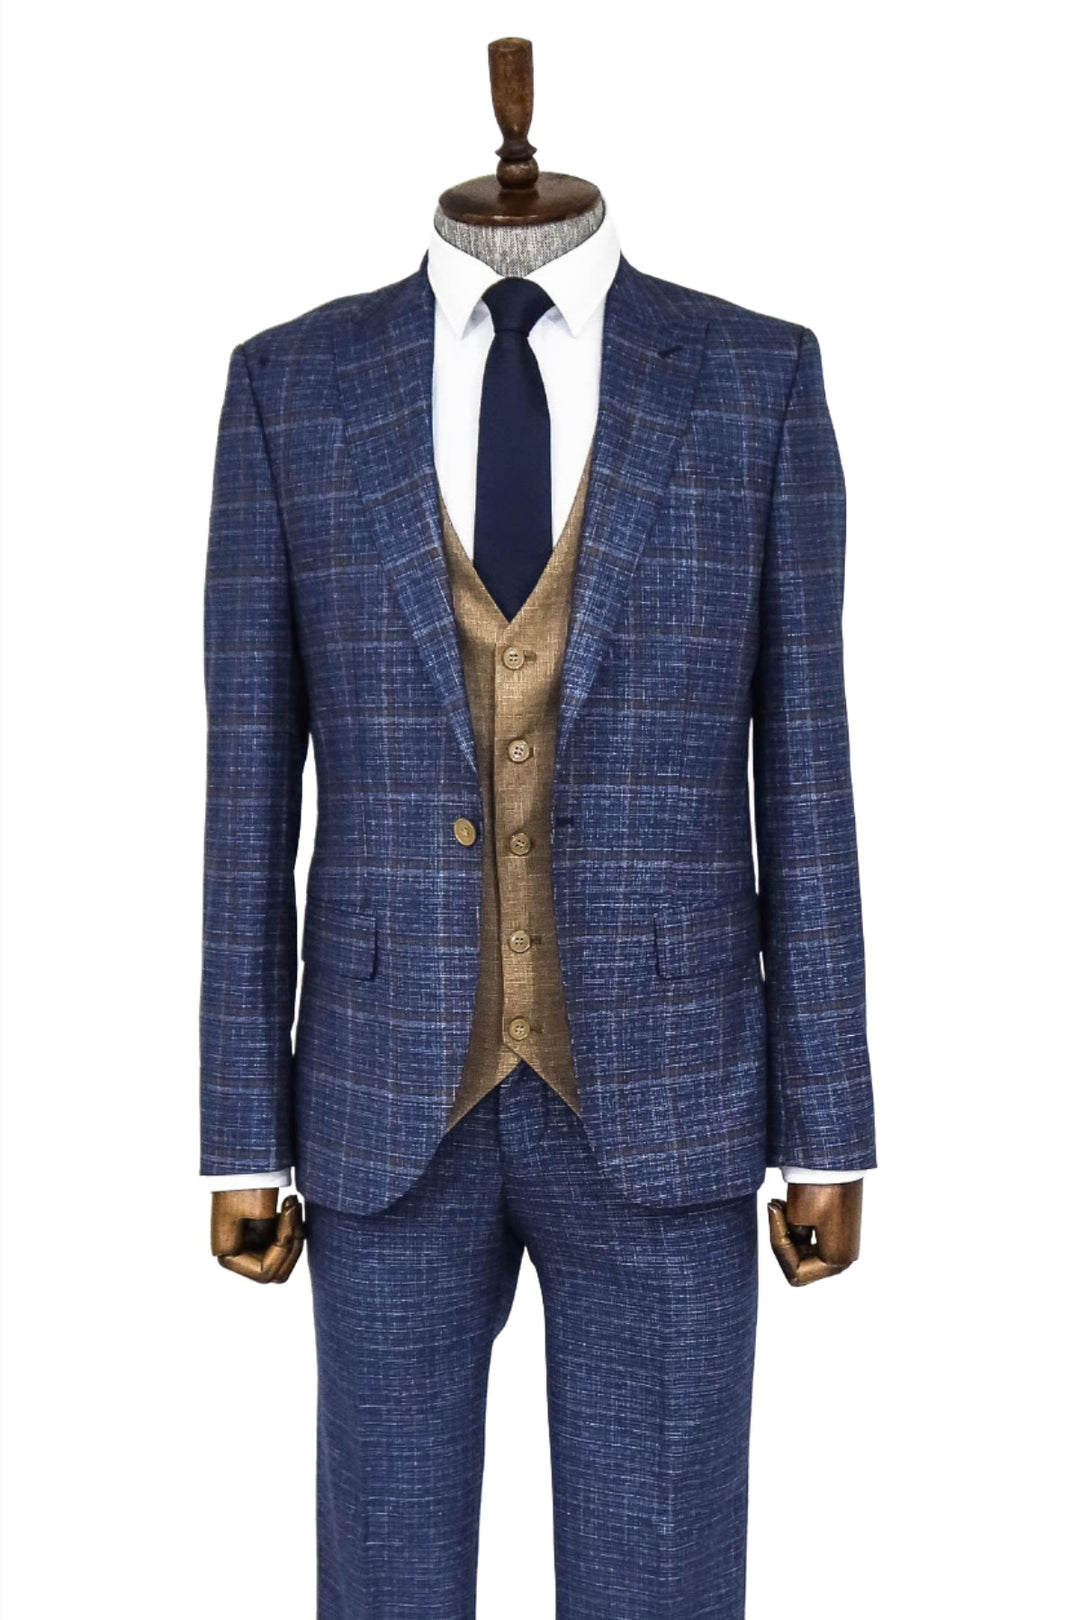 Slim Fit Checked Patterned Navy Blue Men Suit - Wessi